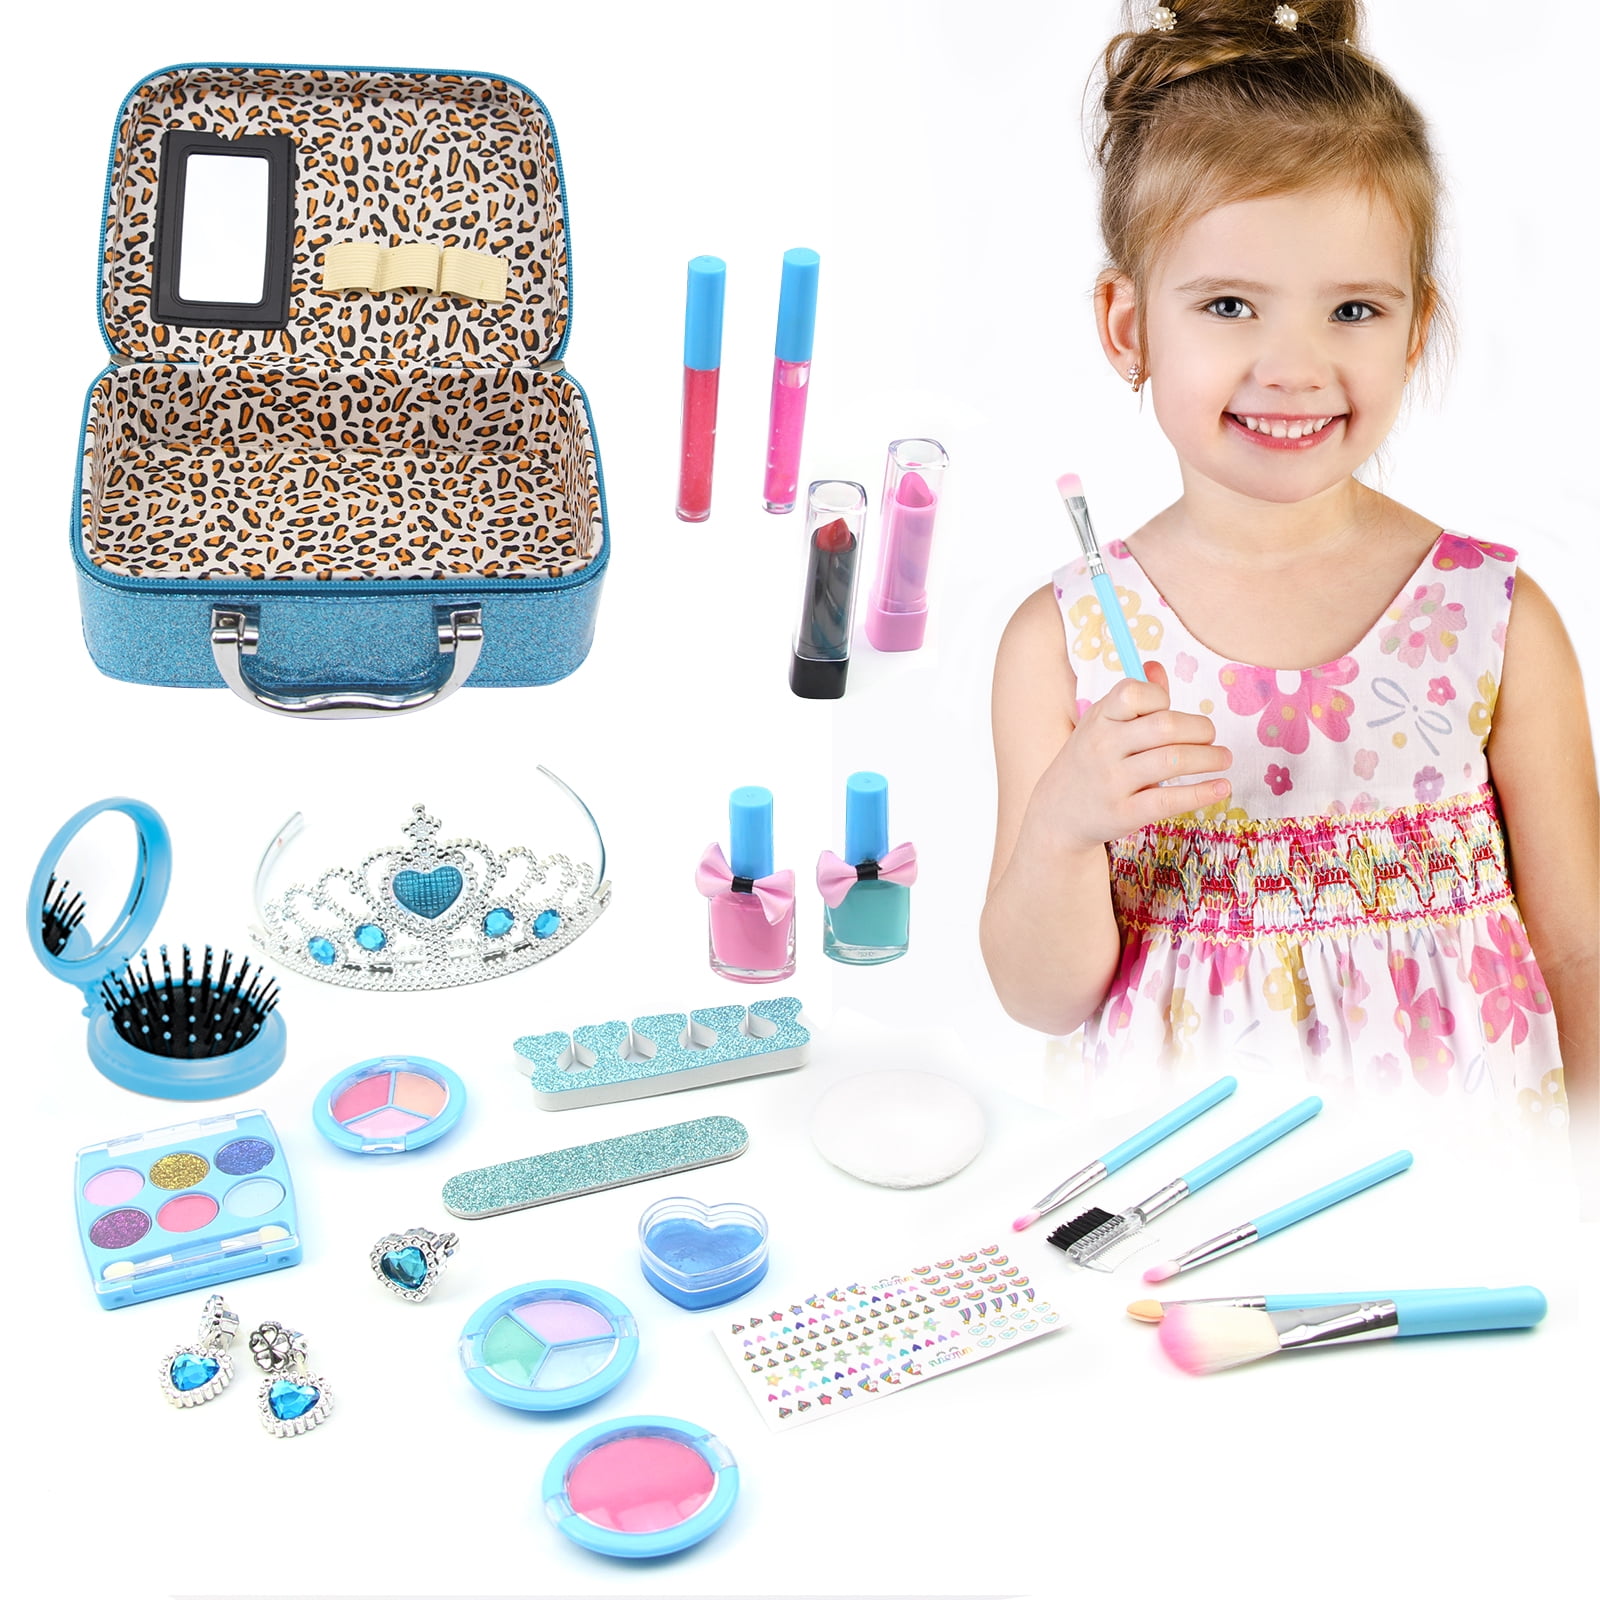 Kids Makeup Kit Girls Toy - Washable Makeup Set for Girls Non Toxic Real Make Up for Toddler Children Princess Beauty Toys for 4 5 6 7 8 9 10 Year Old Girl Christmas Birthday Gifts. - Walmart.com